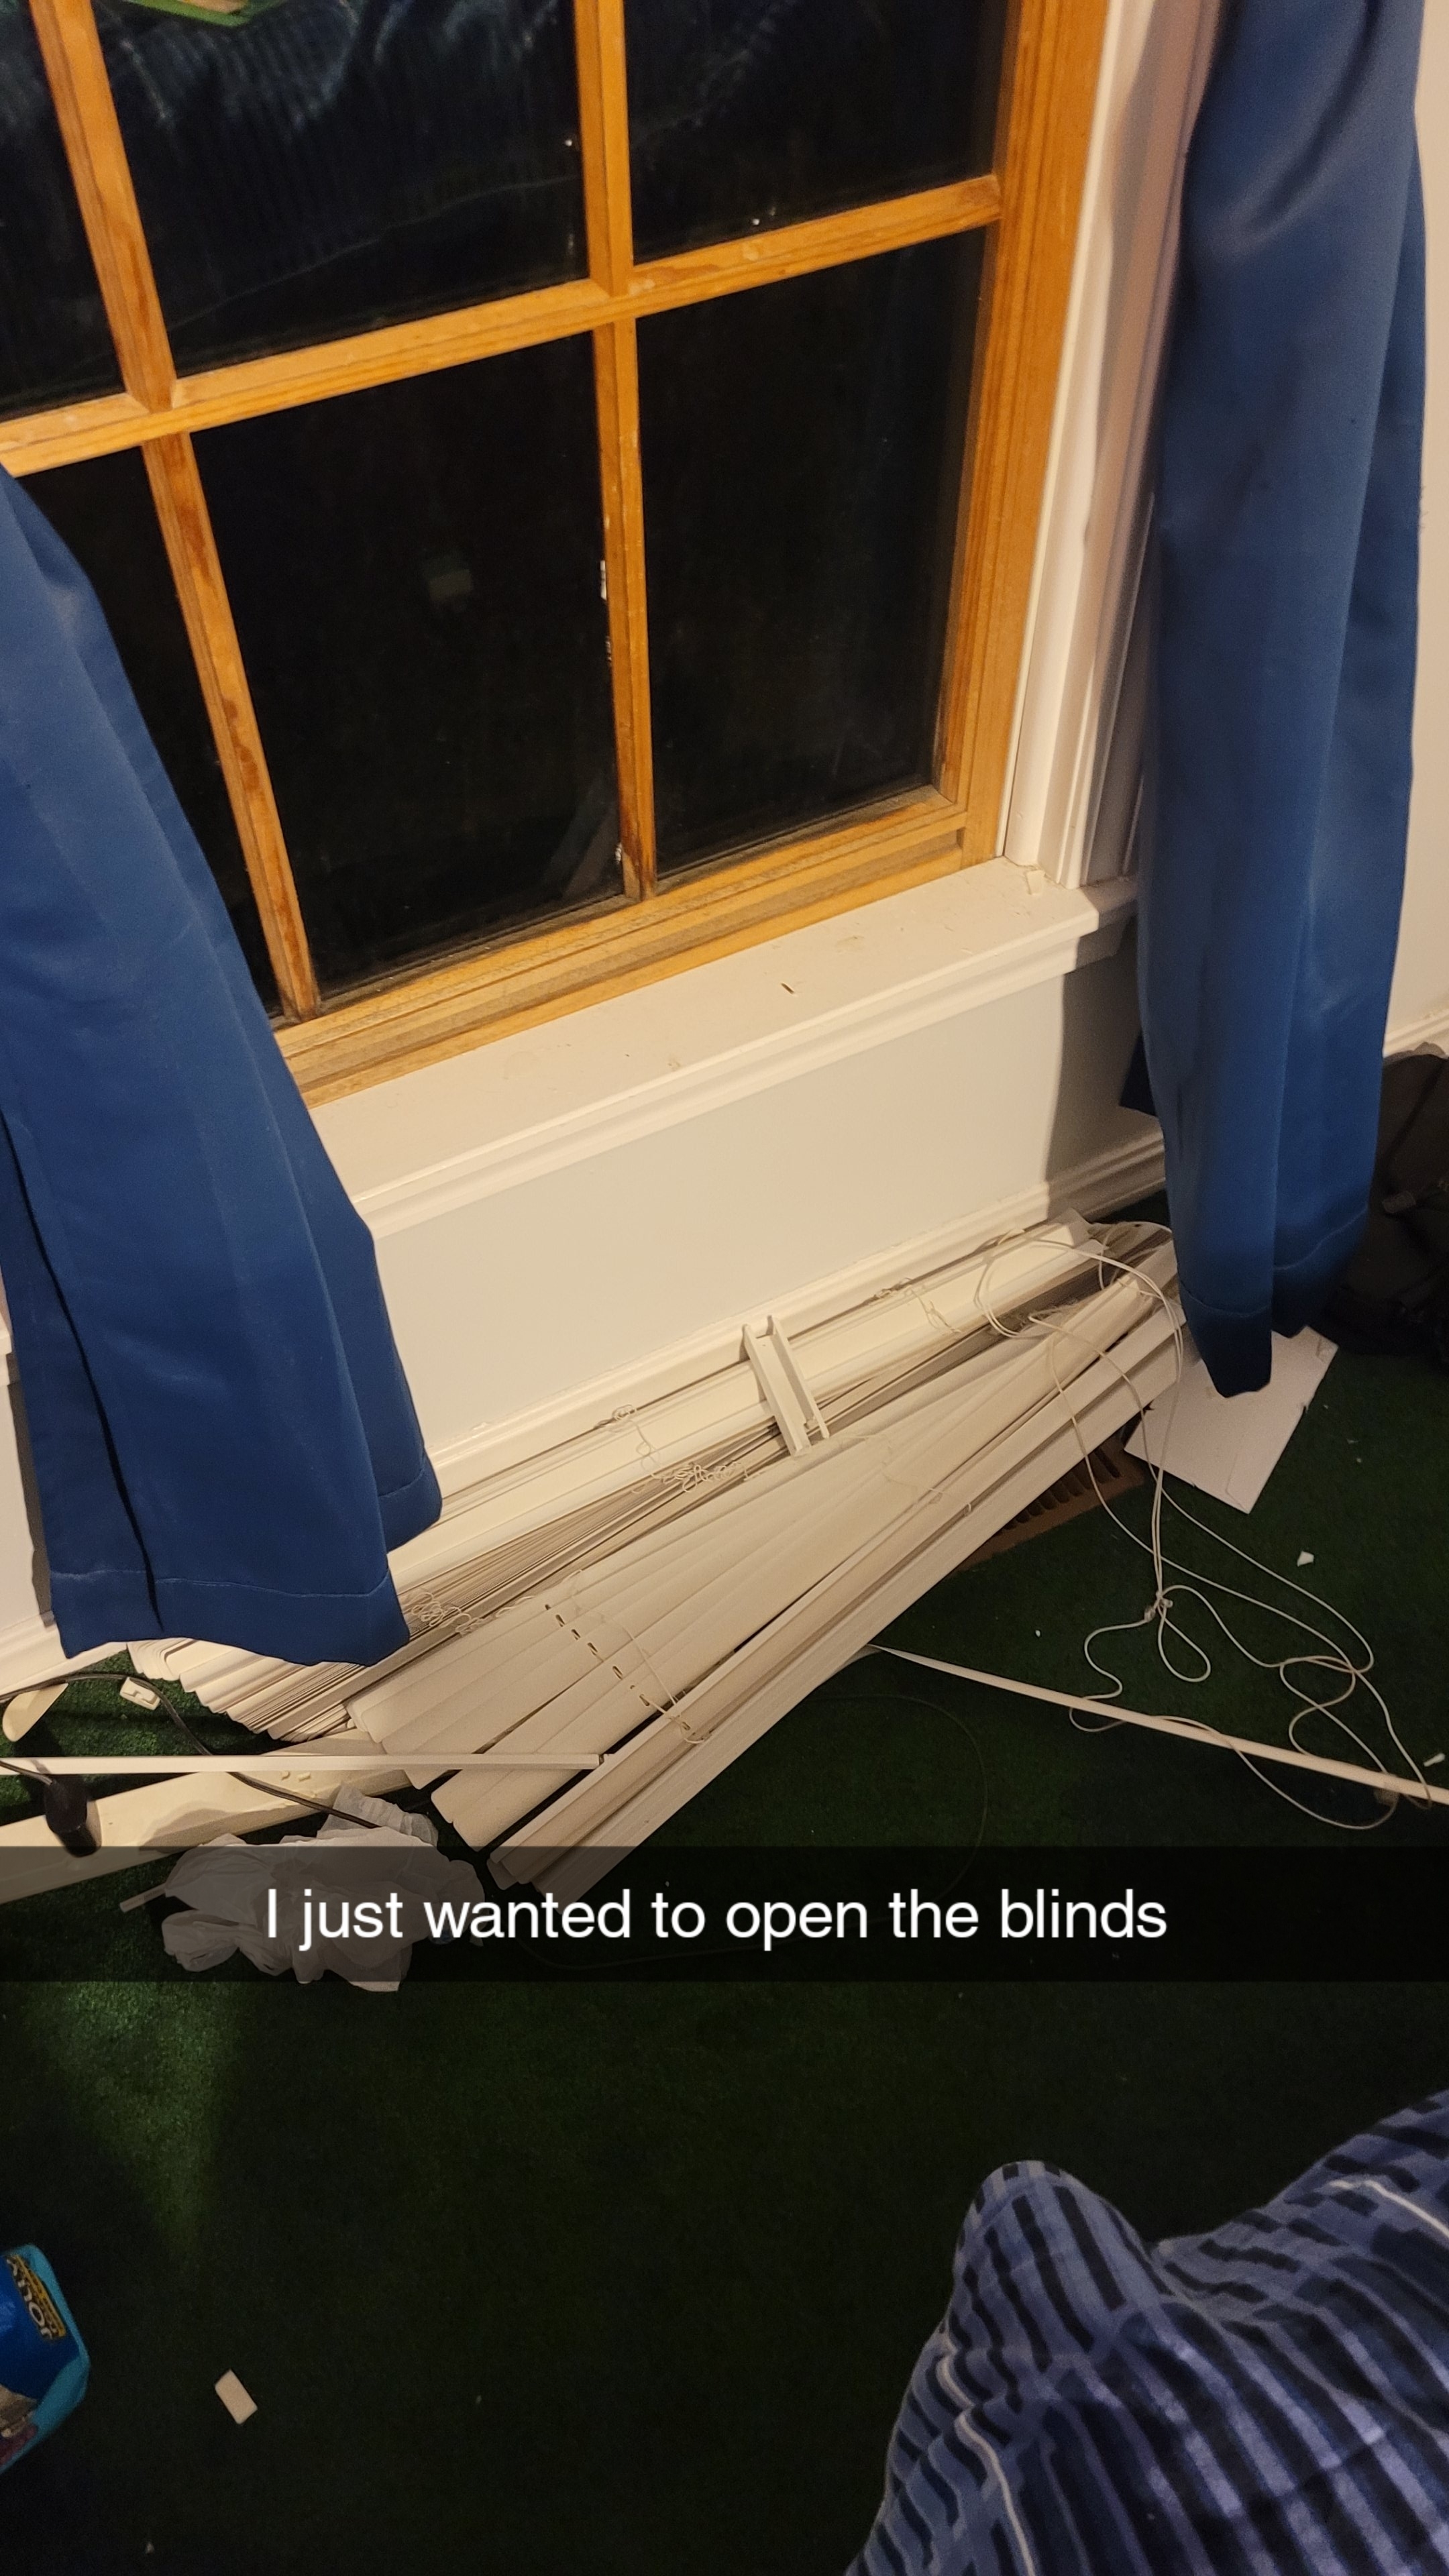 &quot;I just wanted to open the blinds&quot;